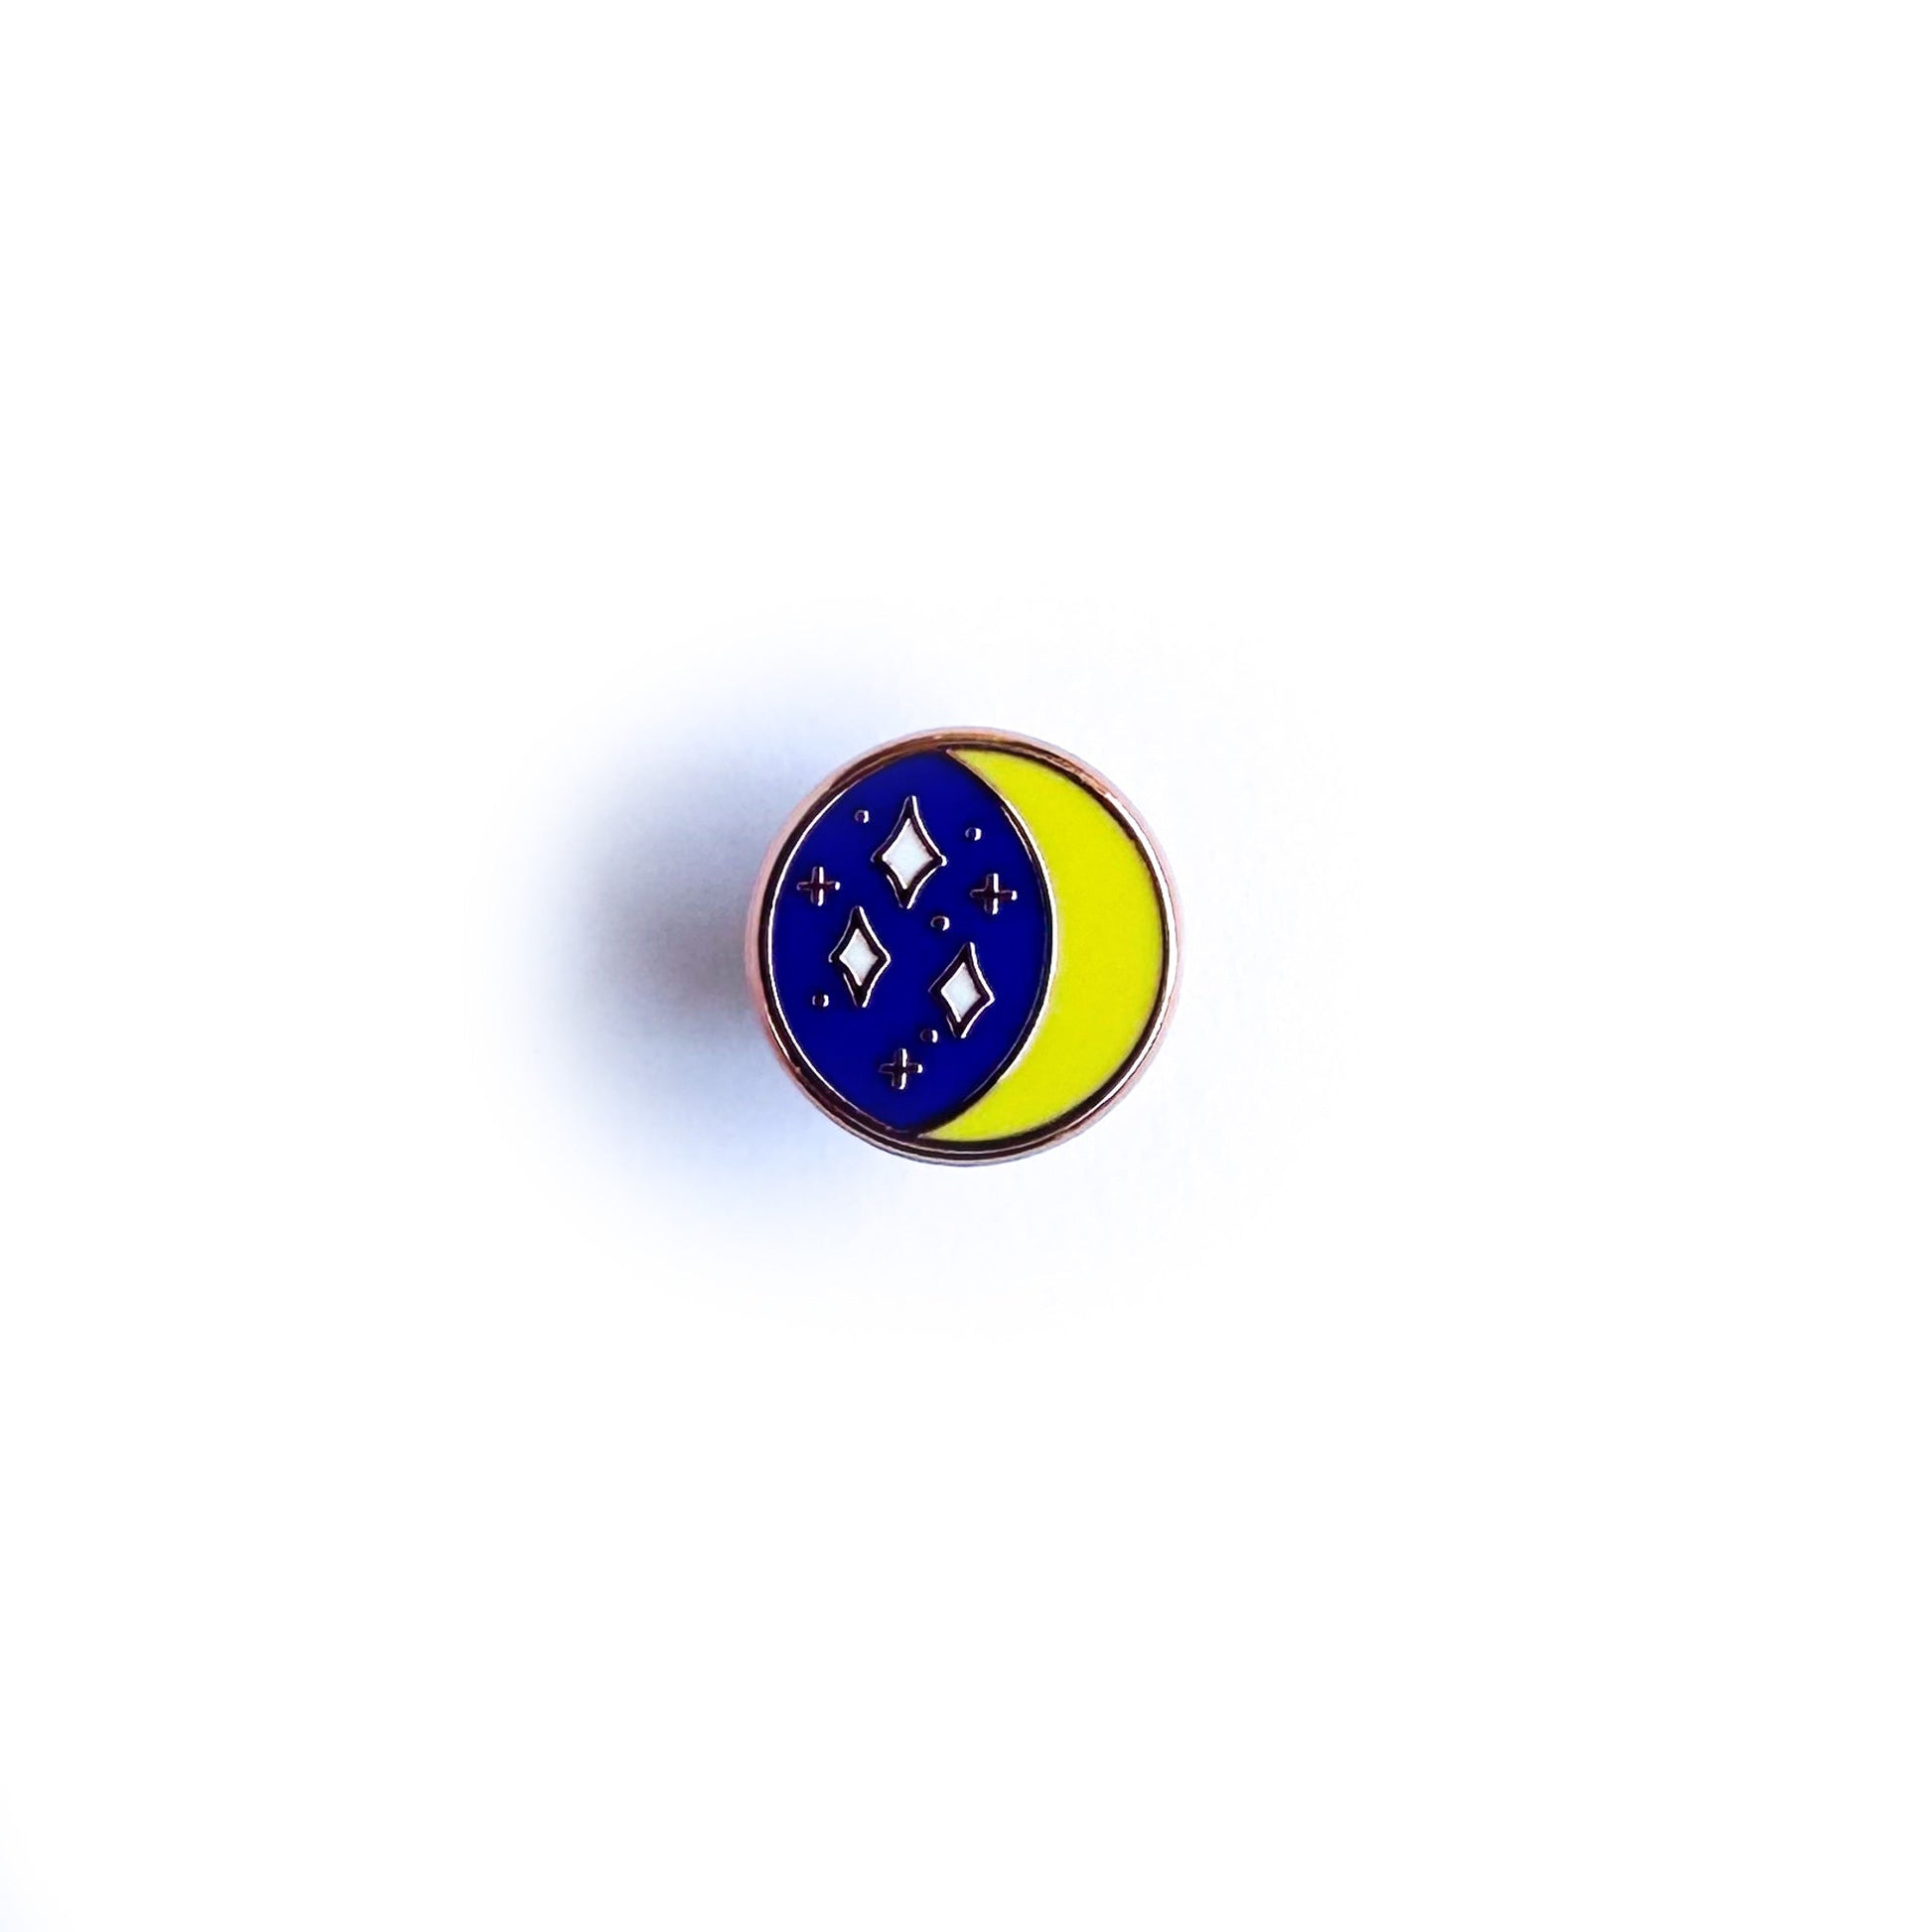 A circular enamel pin with an image of a crescent moon and a starry sky inside it. 